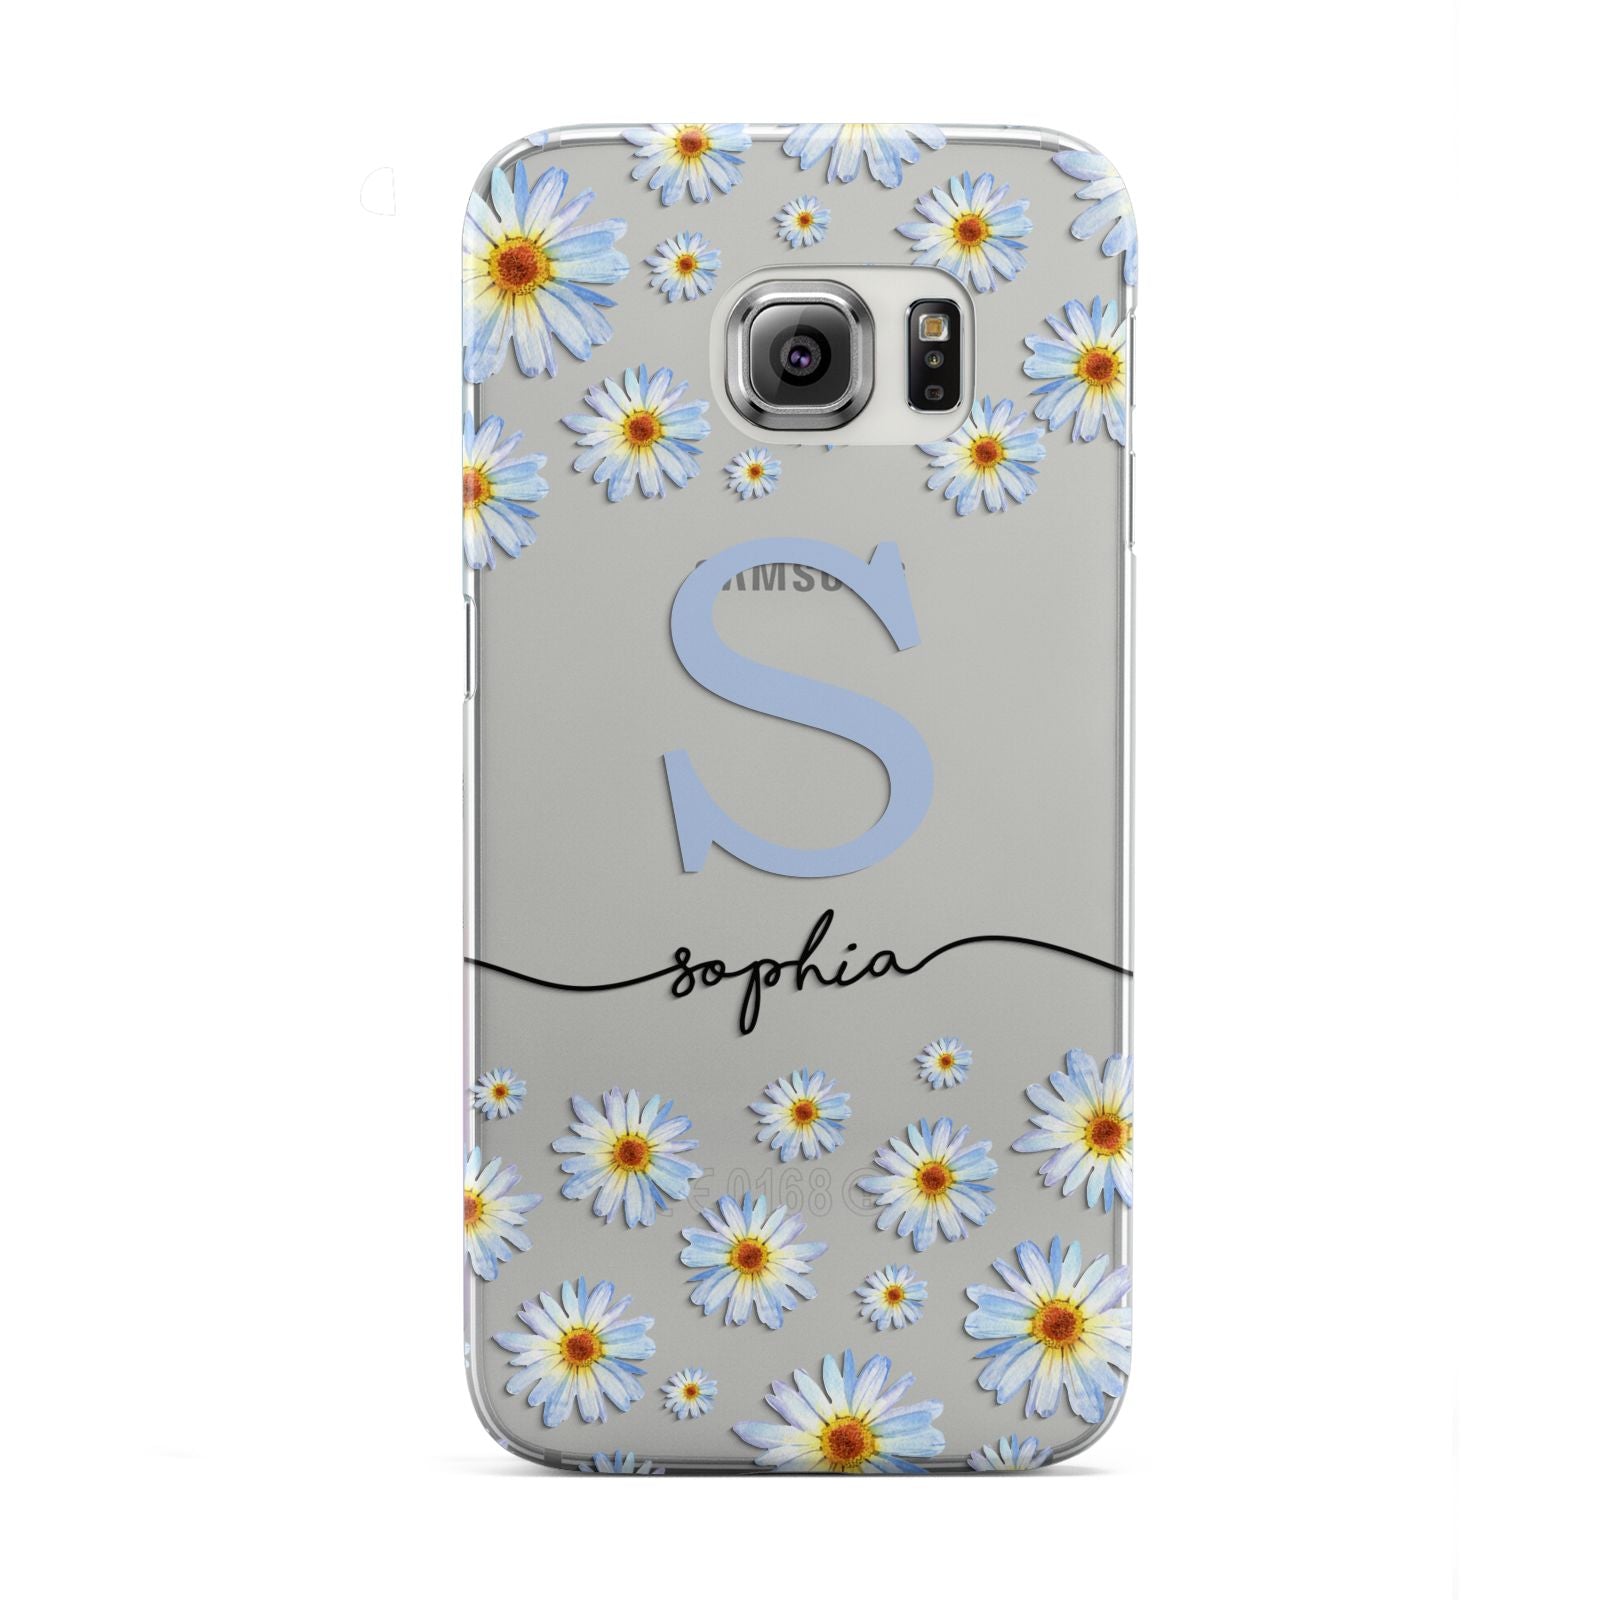 Personalised Daisy Initial Name Samsung Galaxy S6 Edge Case